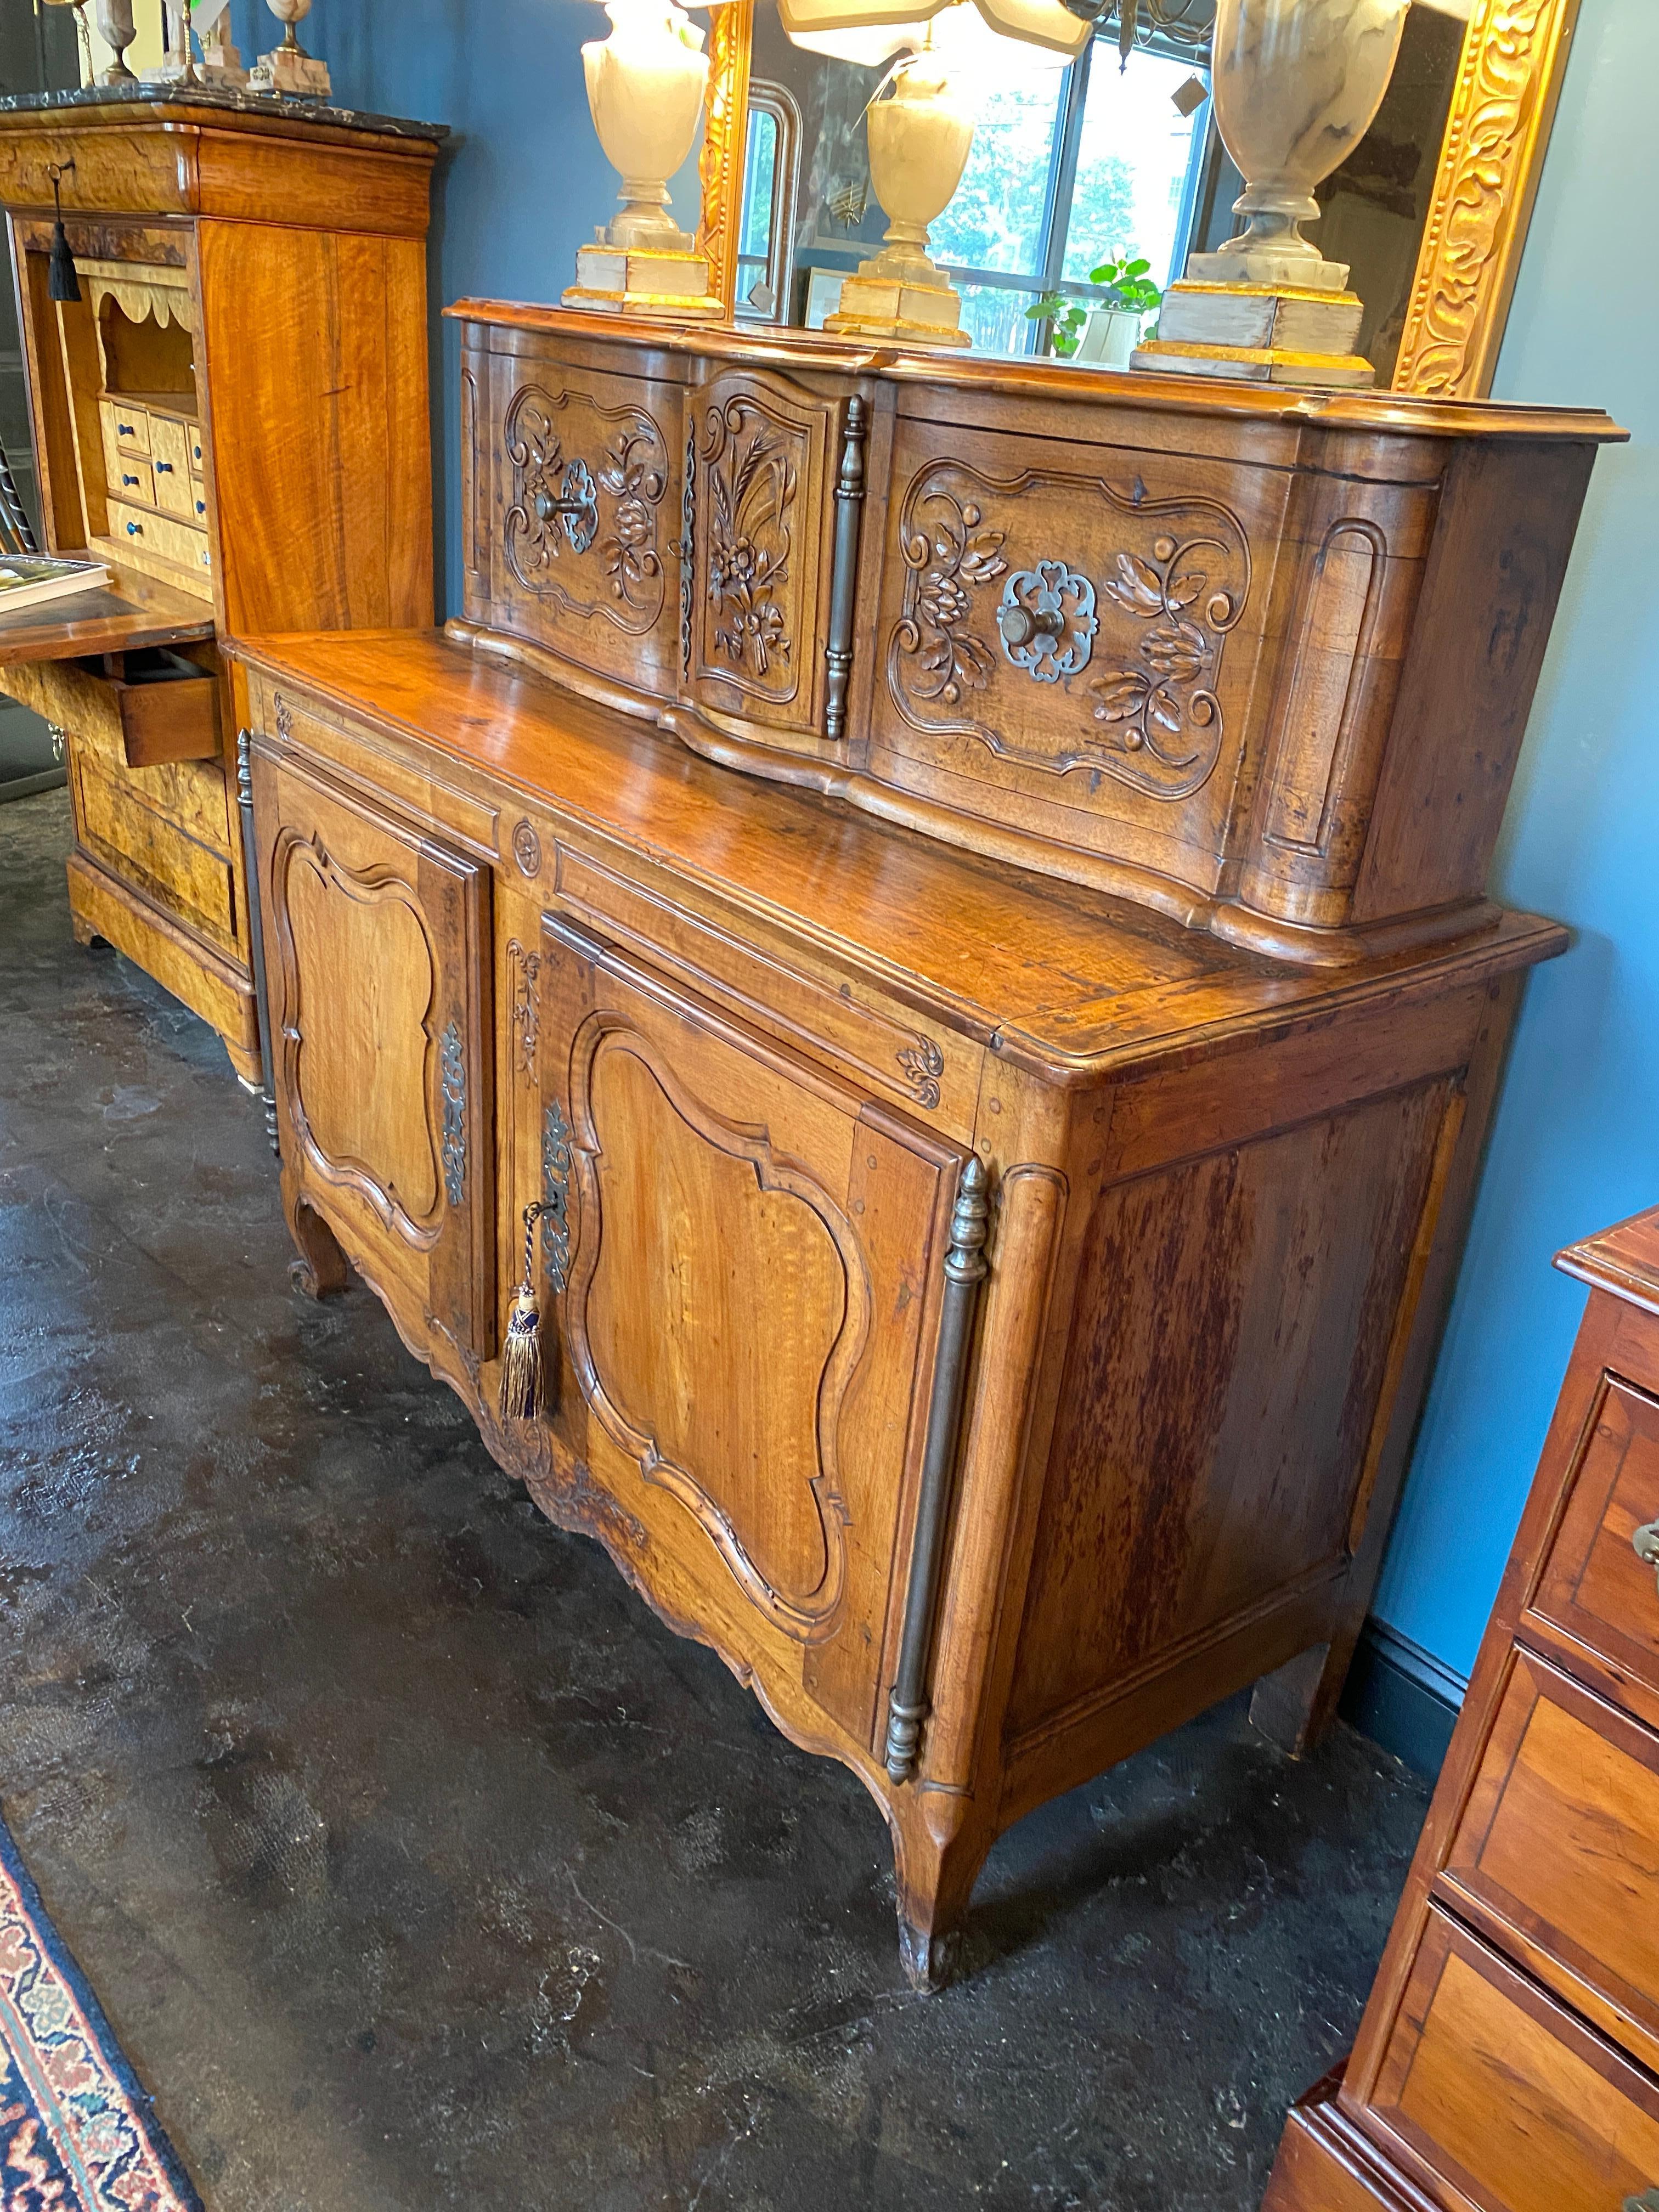 Handsome walnut buffet cabinet with hutch top. Two carved sliding doors and one central carved door with steel hardware. Carved Walnut door panels on the lower cabinet, fitted with one interior shelf and resting on cabriolet feets. Fantastic patina